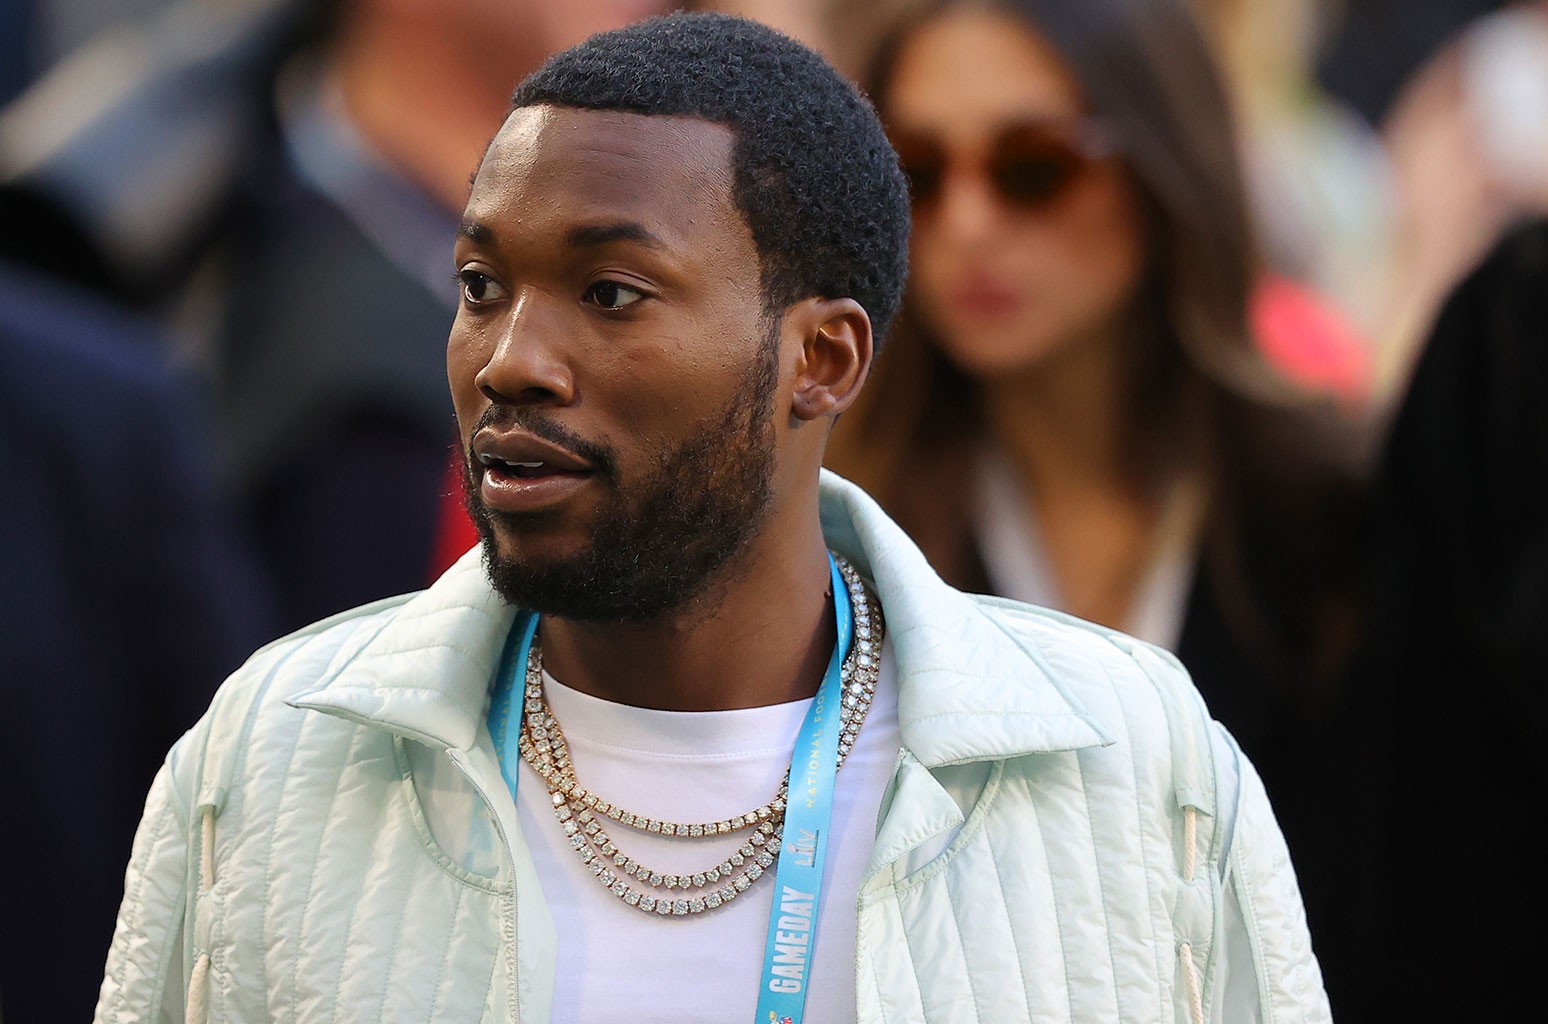 Meek Mill To Release New Album 'Expensive Pain' on October 1; Shares  Artwork